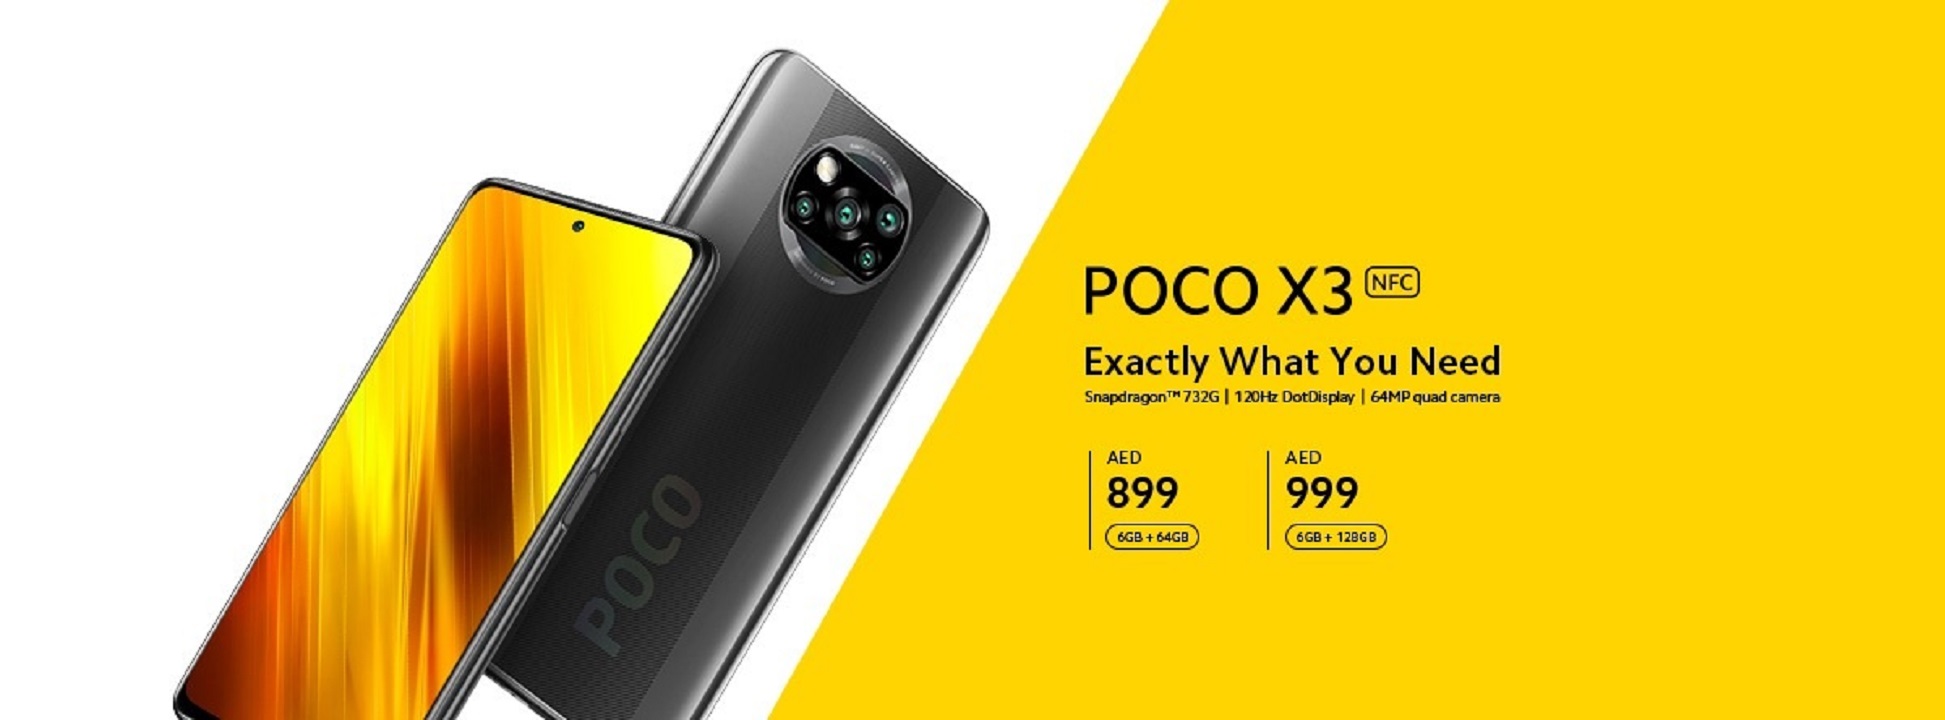 POCO X3 NFC : Powered By New Snapdragon 732G!